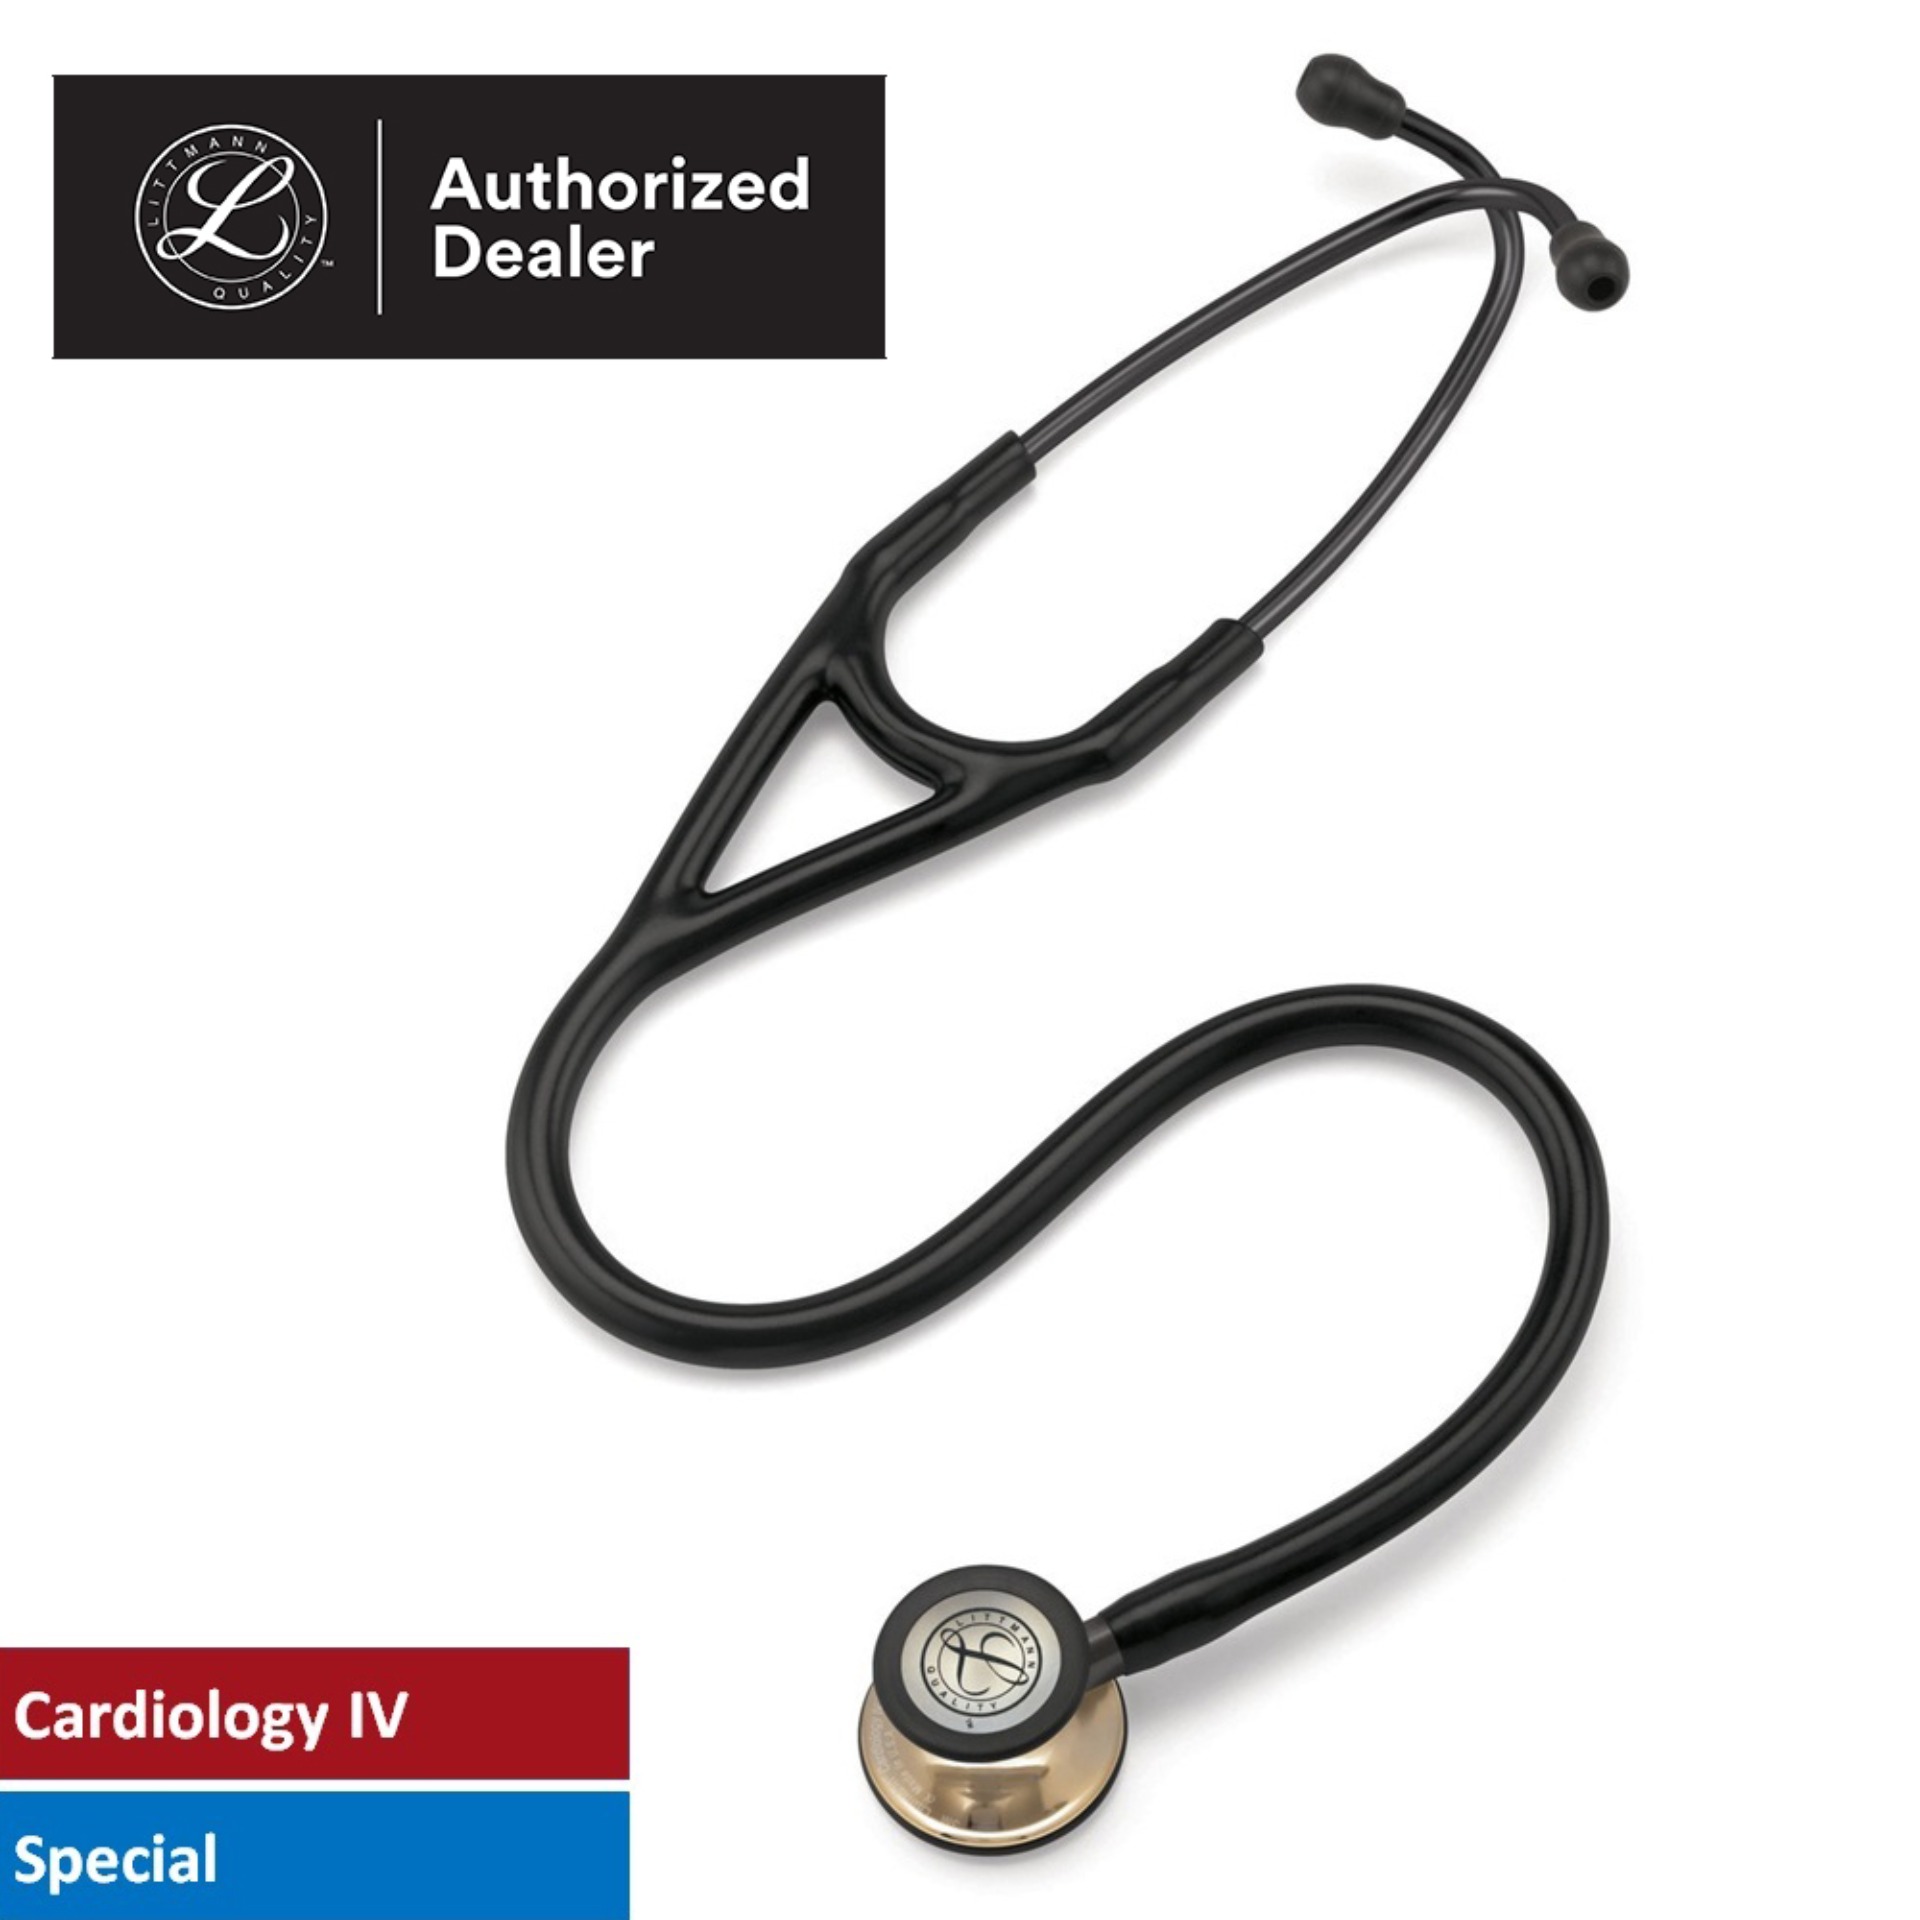 3M Littmann Cardiology IV Stethoscope, 27 inch, #6179 (Black Tube, Champagne-Finish Chestpiece, Stainless Stem and Eartubes)